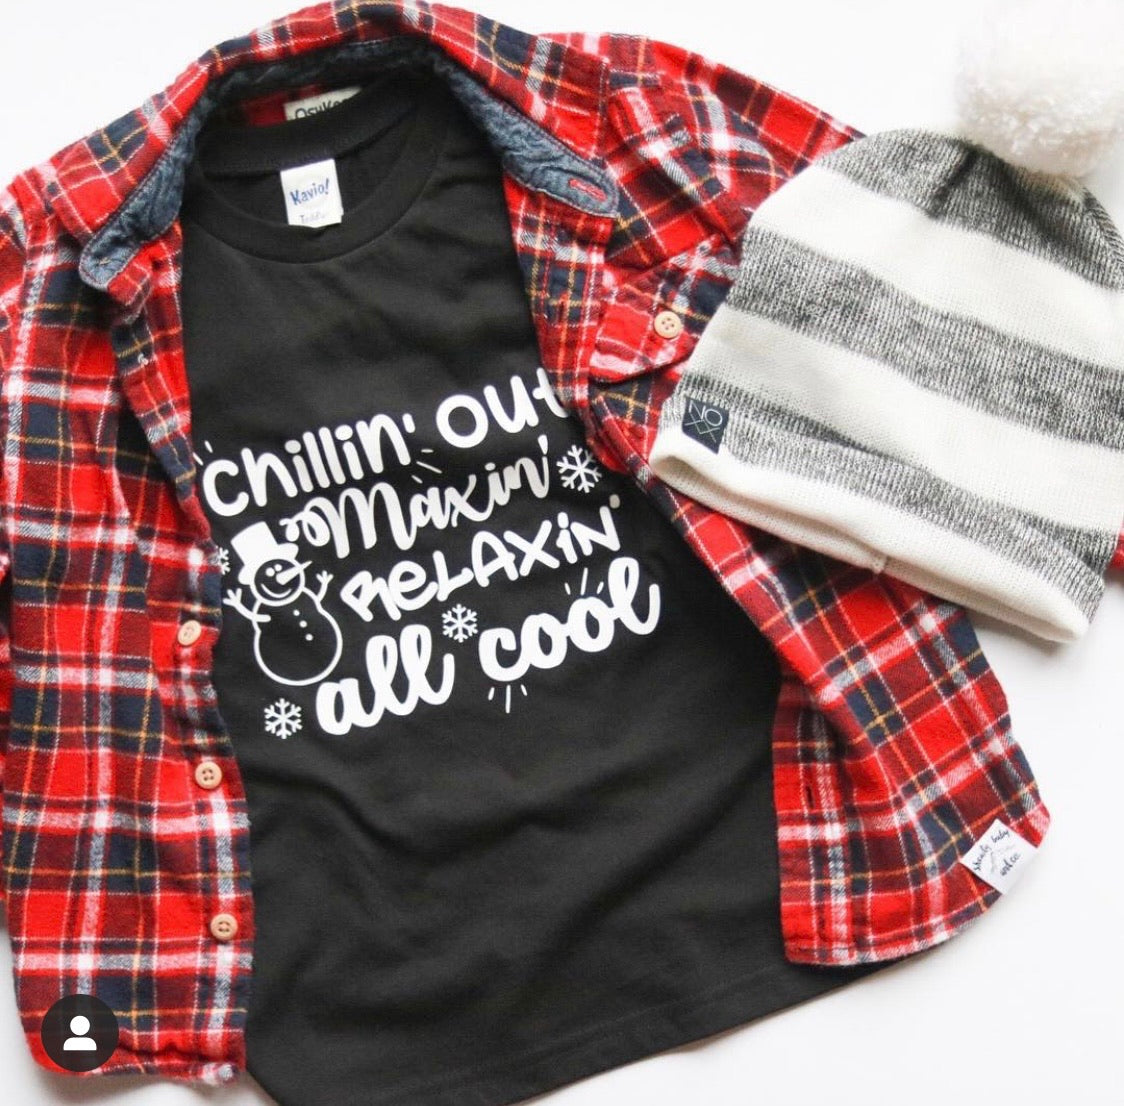 CHILLIN OUT MAXIN RELAXIN ALL COOL KIDS SHIRT